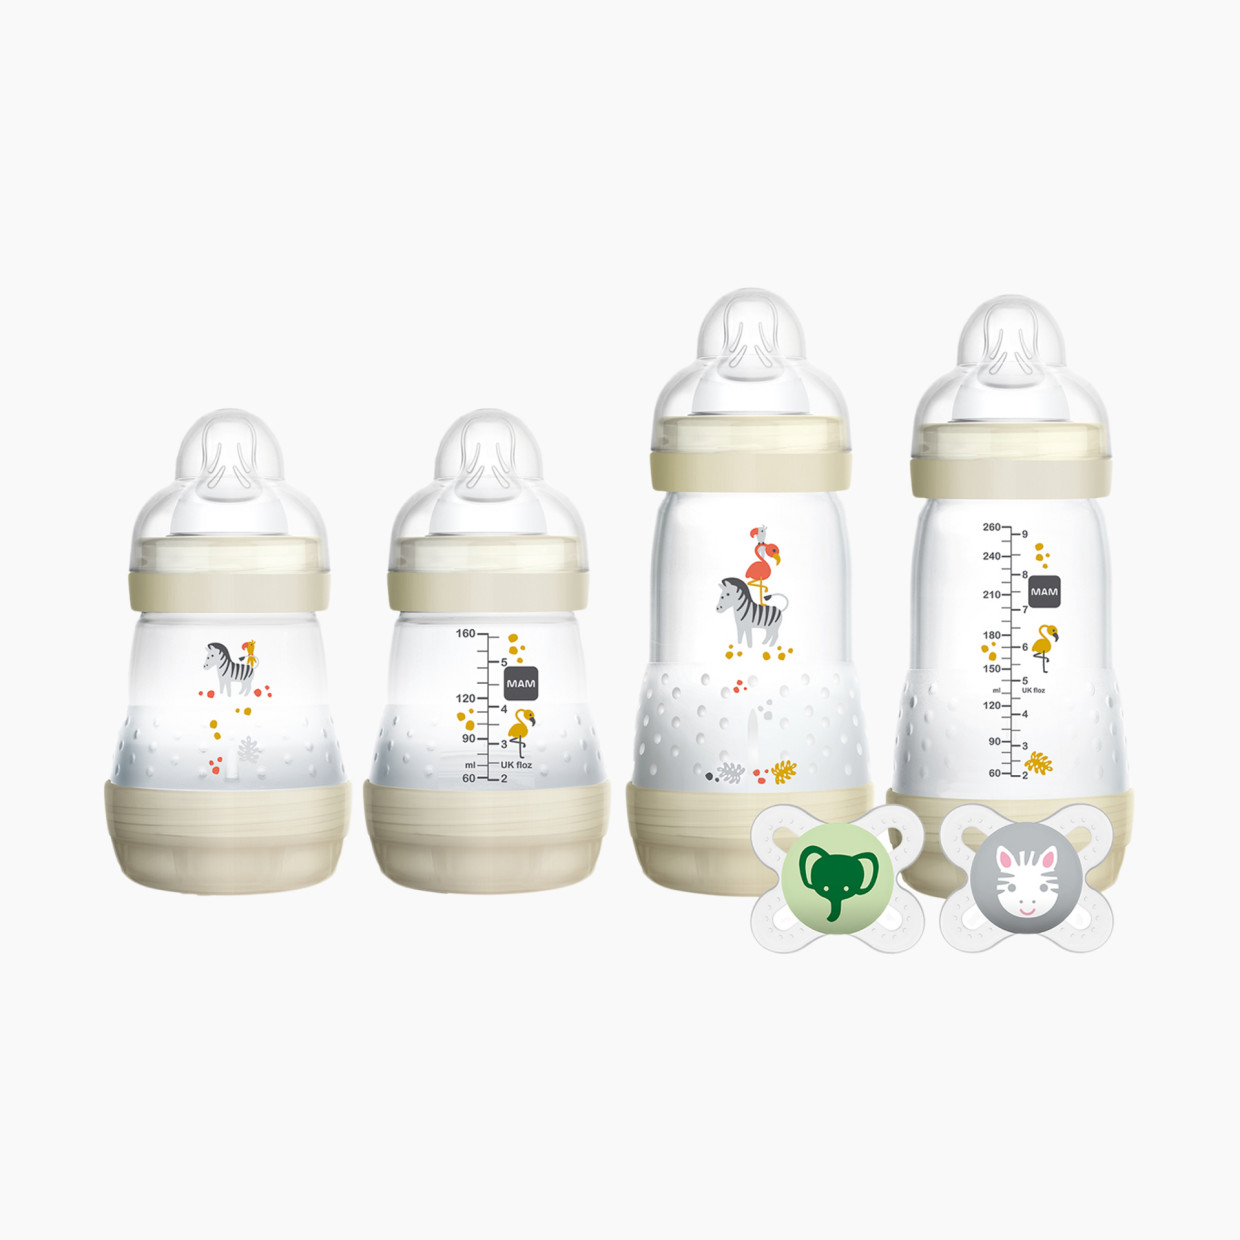 MAM Feed & Soothe Bottle & Pacifier Gift Set.